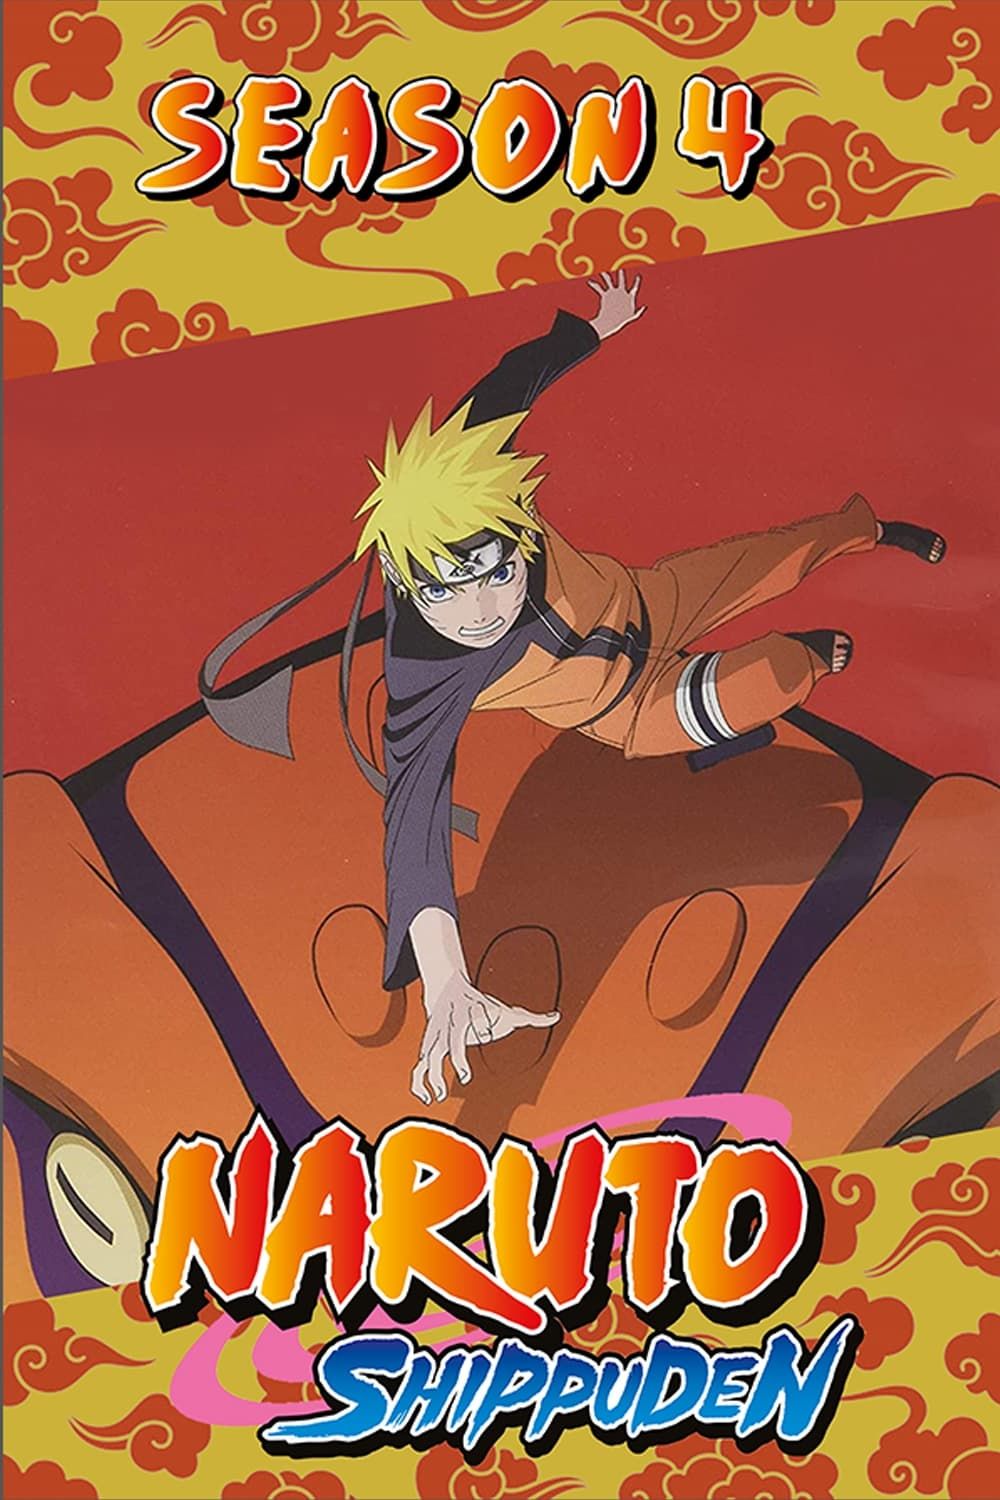 Naruto Shippuden the Movie: Road to Ninja｜CATCHPLAY+ Watch Full Movie &  Episodes Online